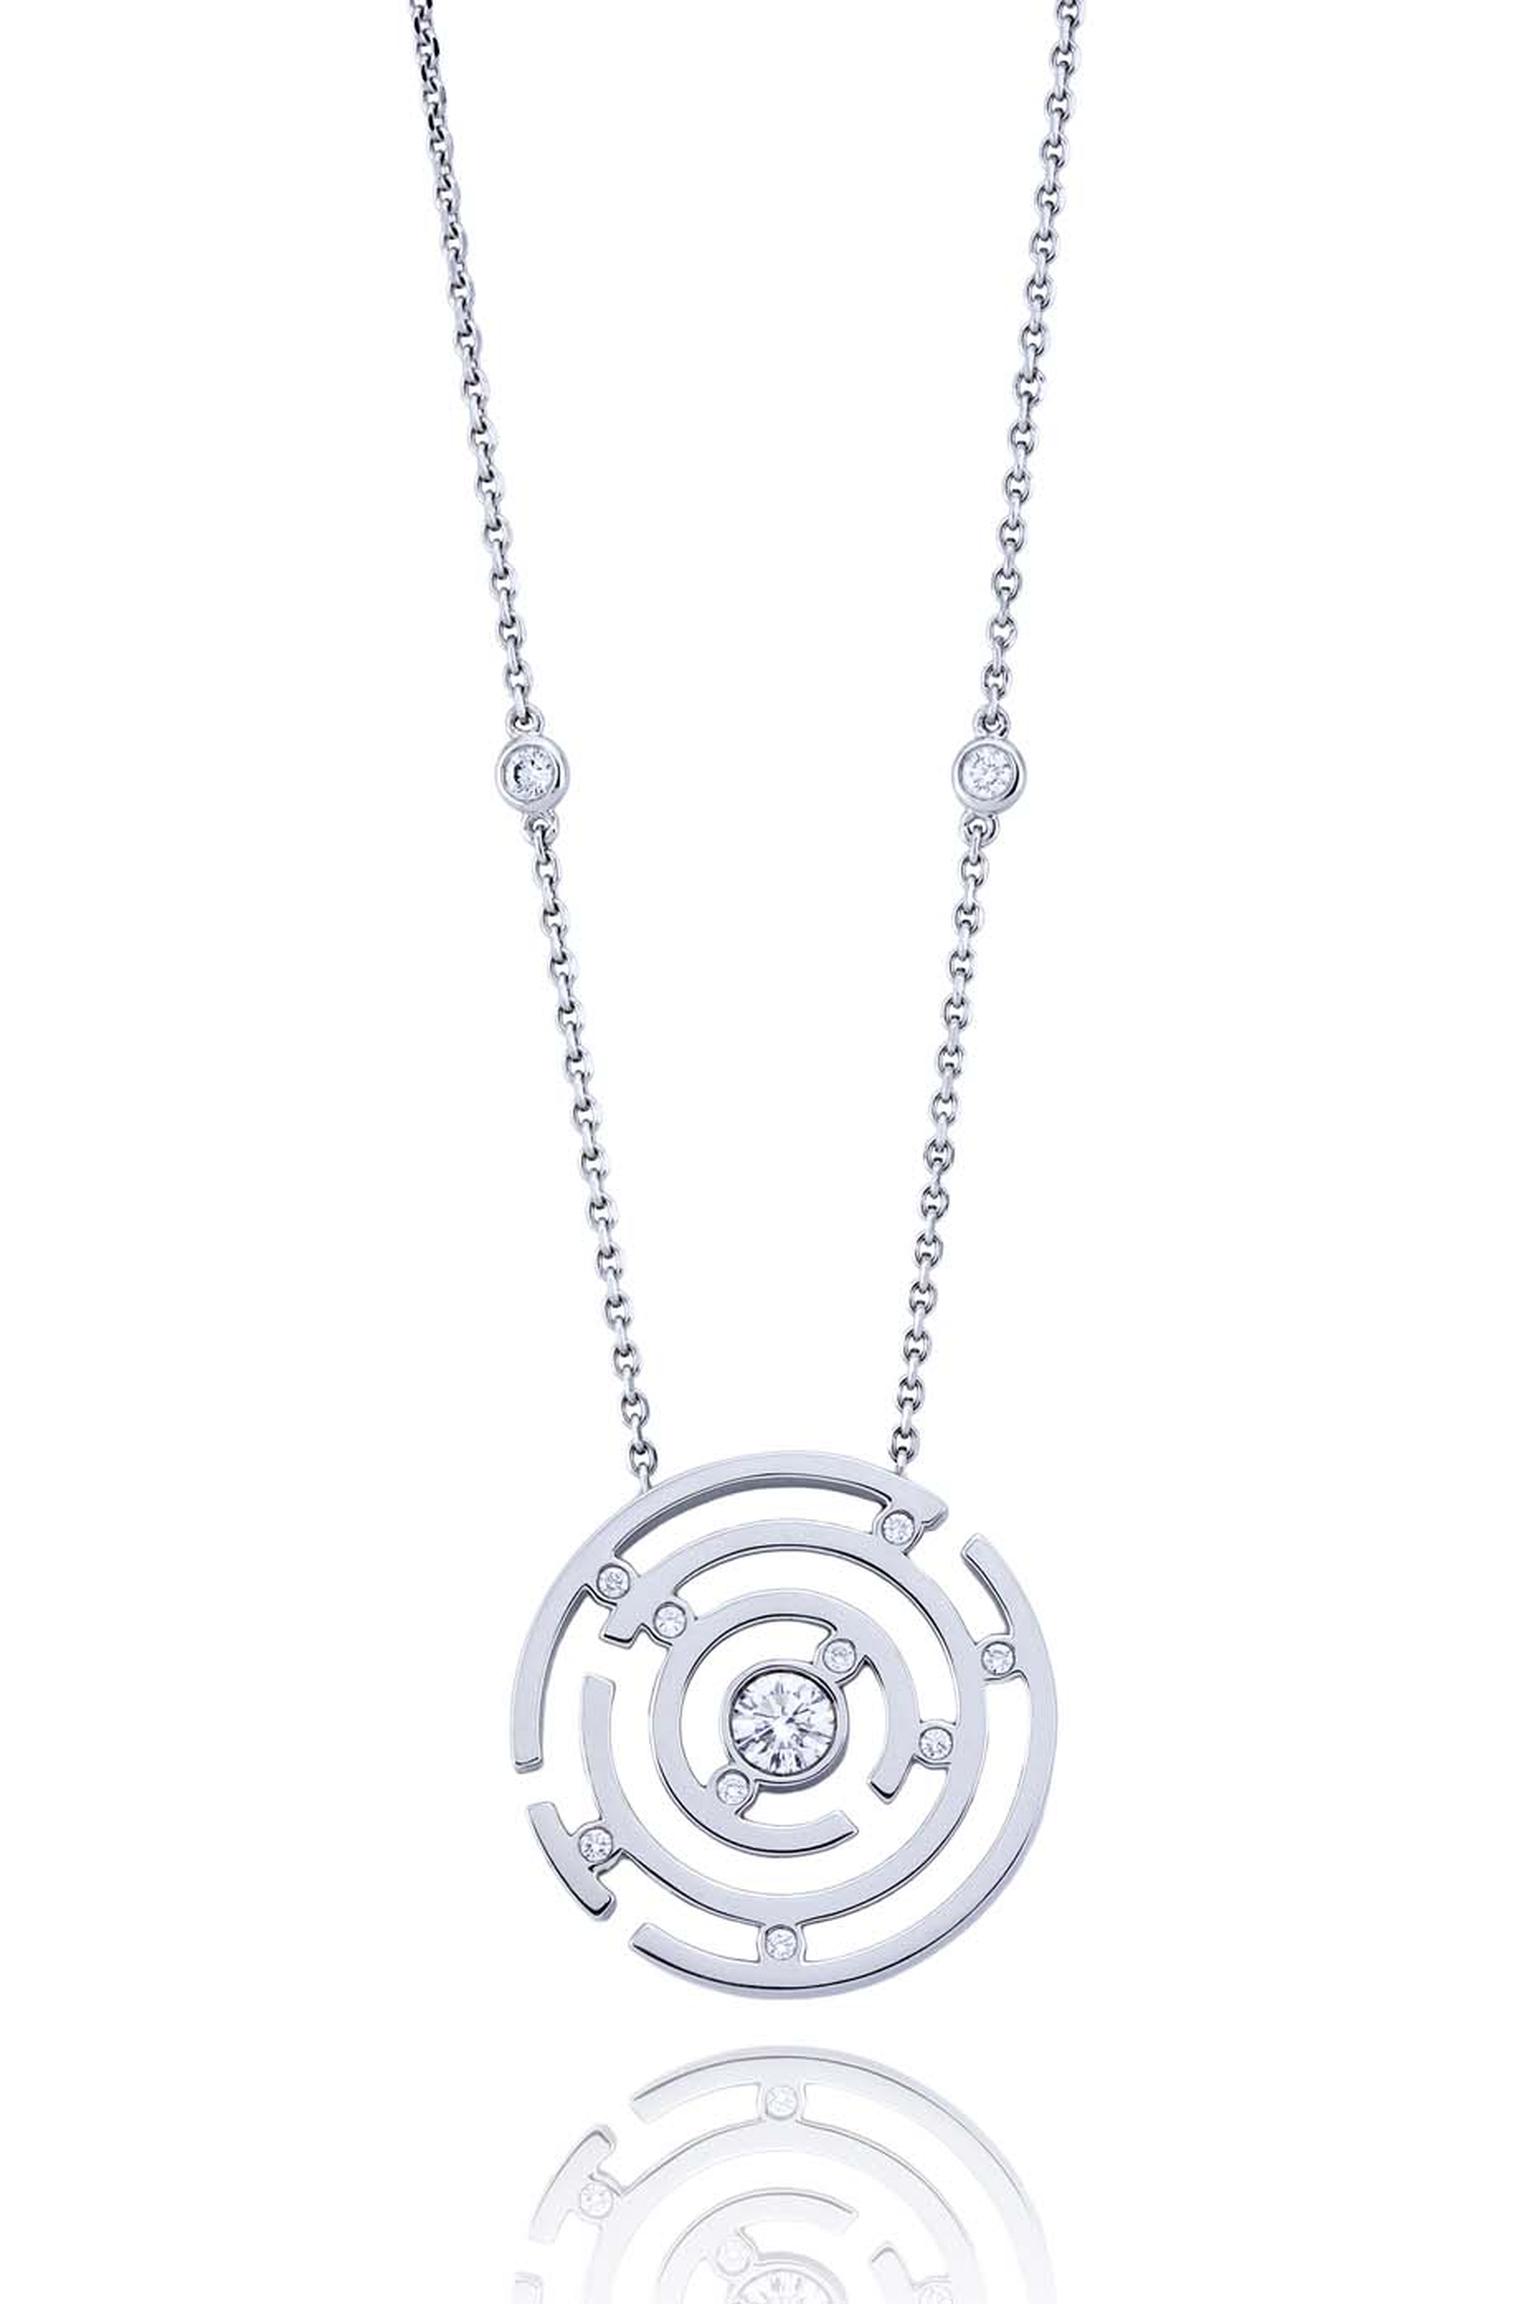 Boodles Maze collection provides a bird's-eye view of the